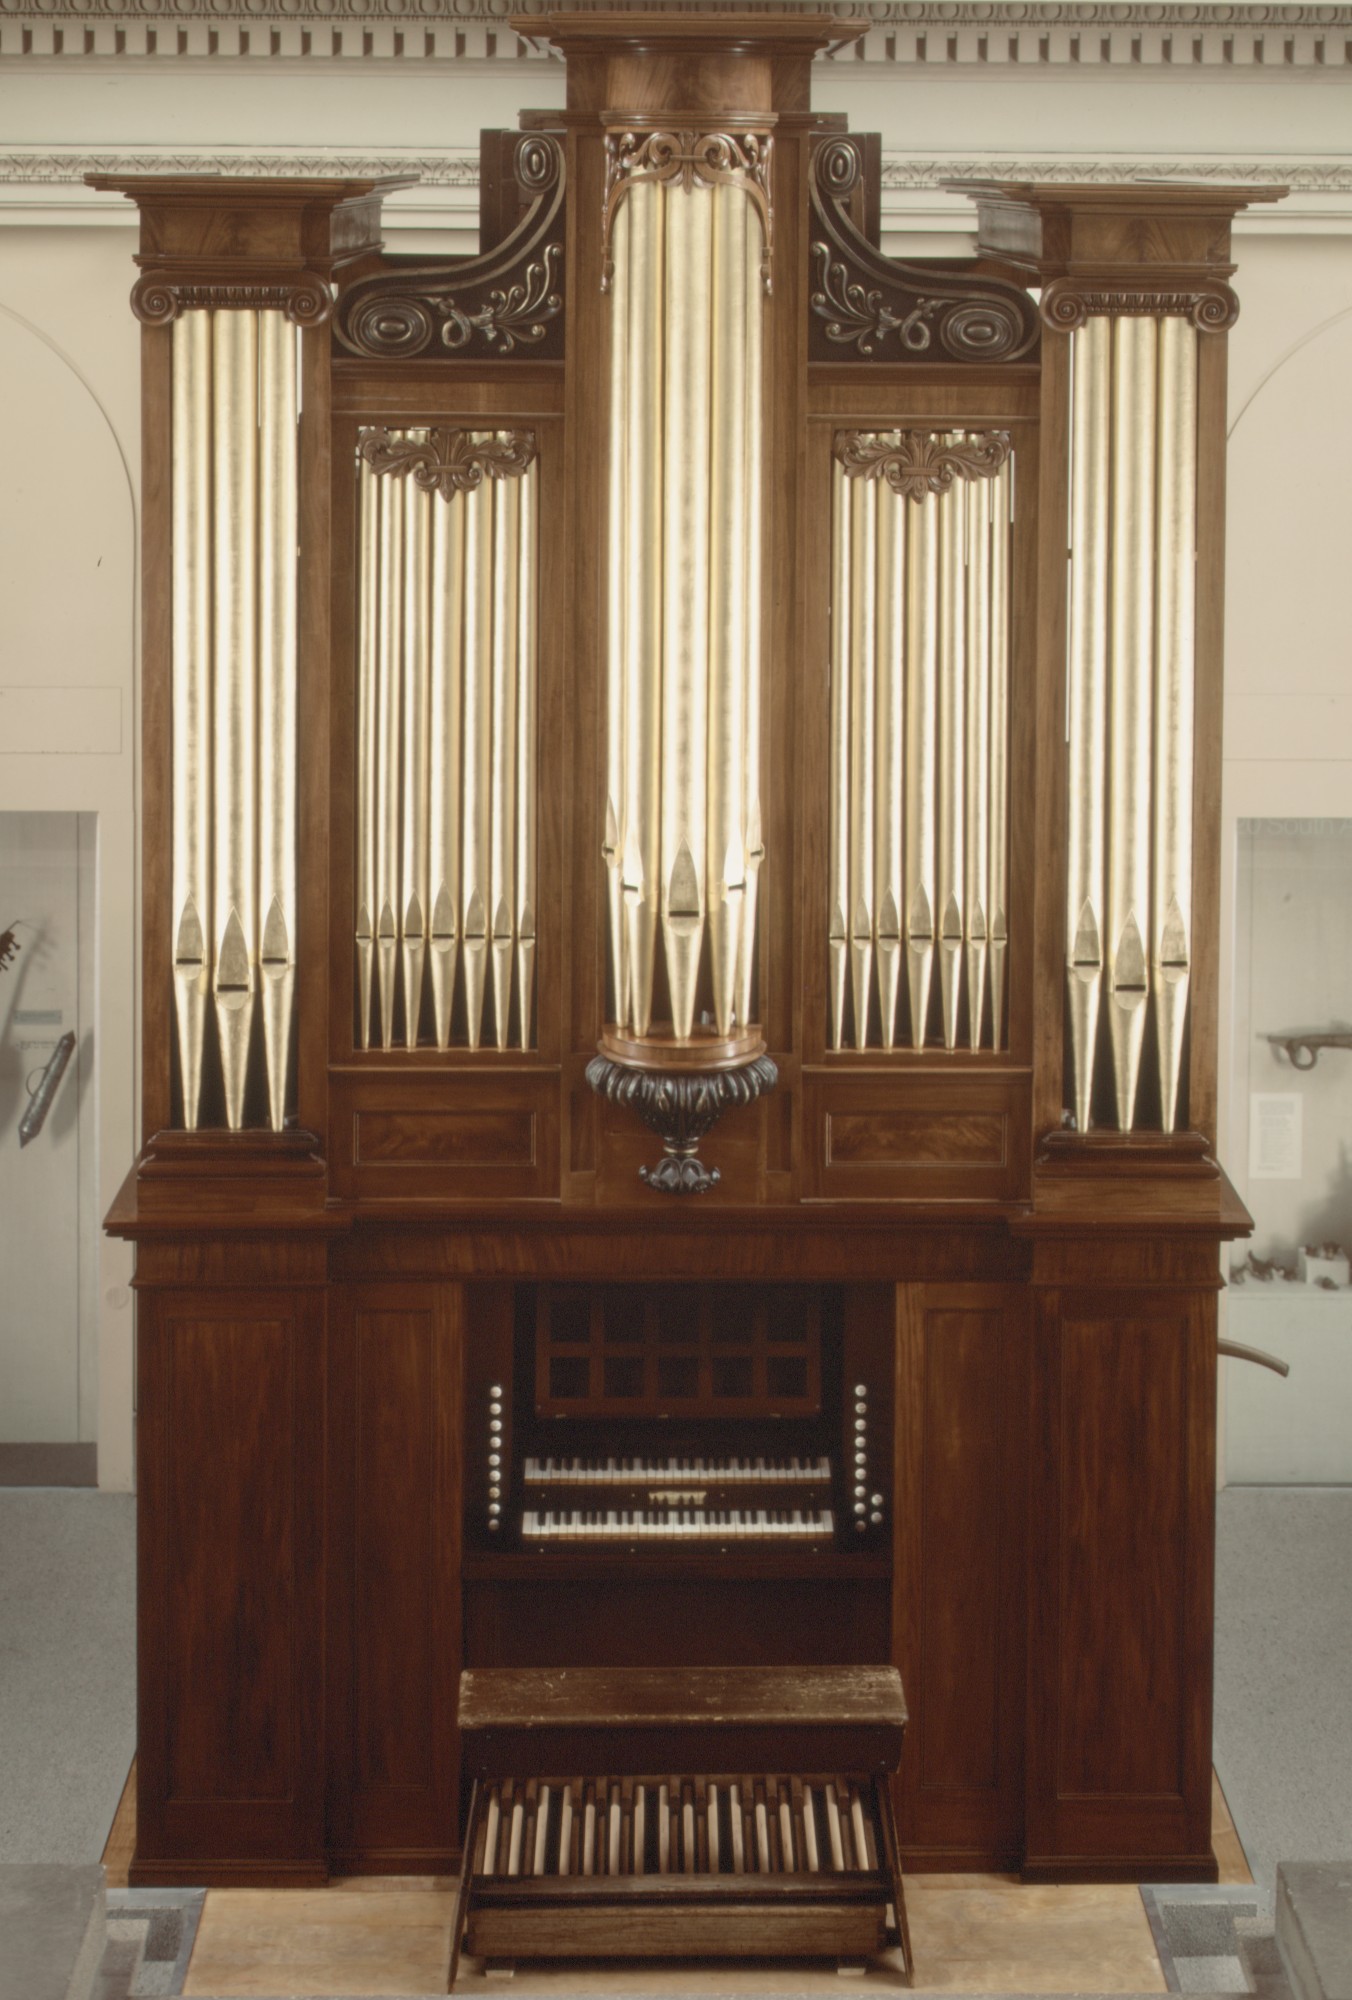 To Conserve The Met's Pipe Organ, We Pulled Out All the Stops!